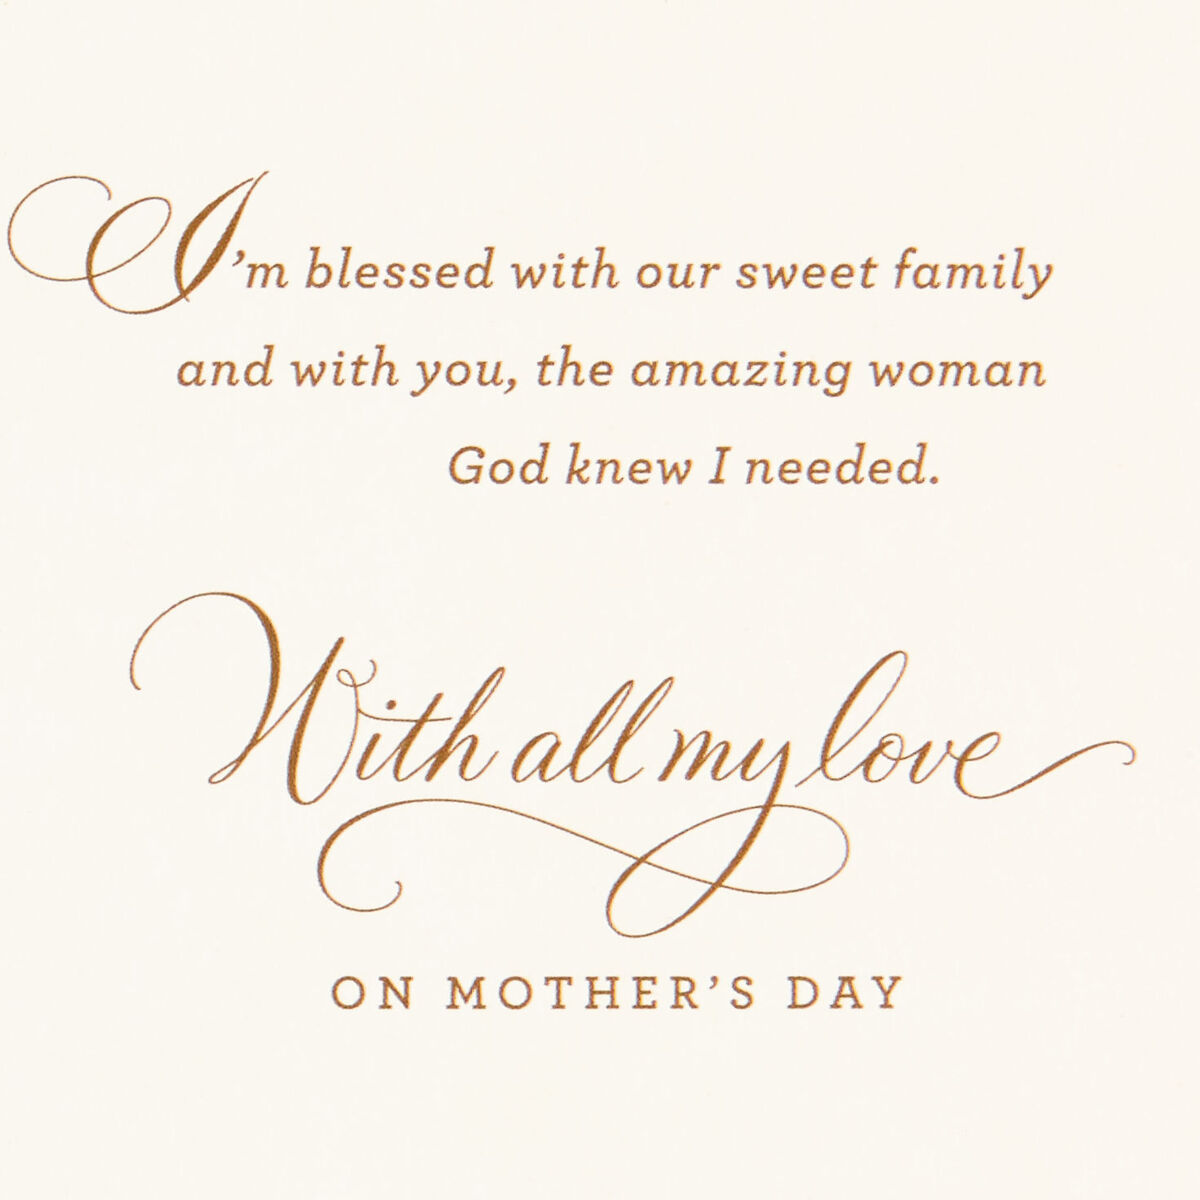 happy-mothers-day-bible-greetings